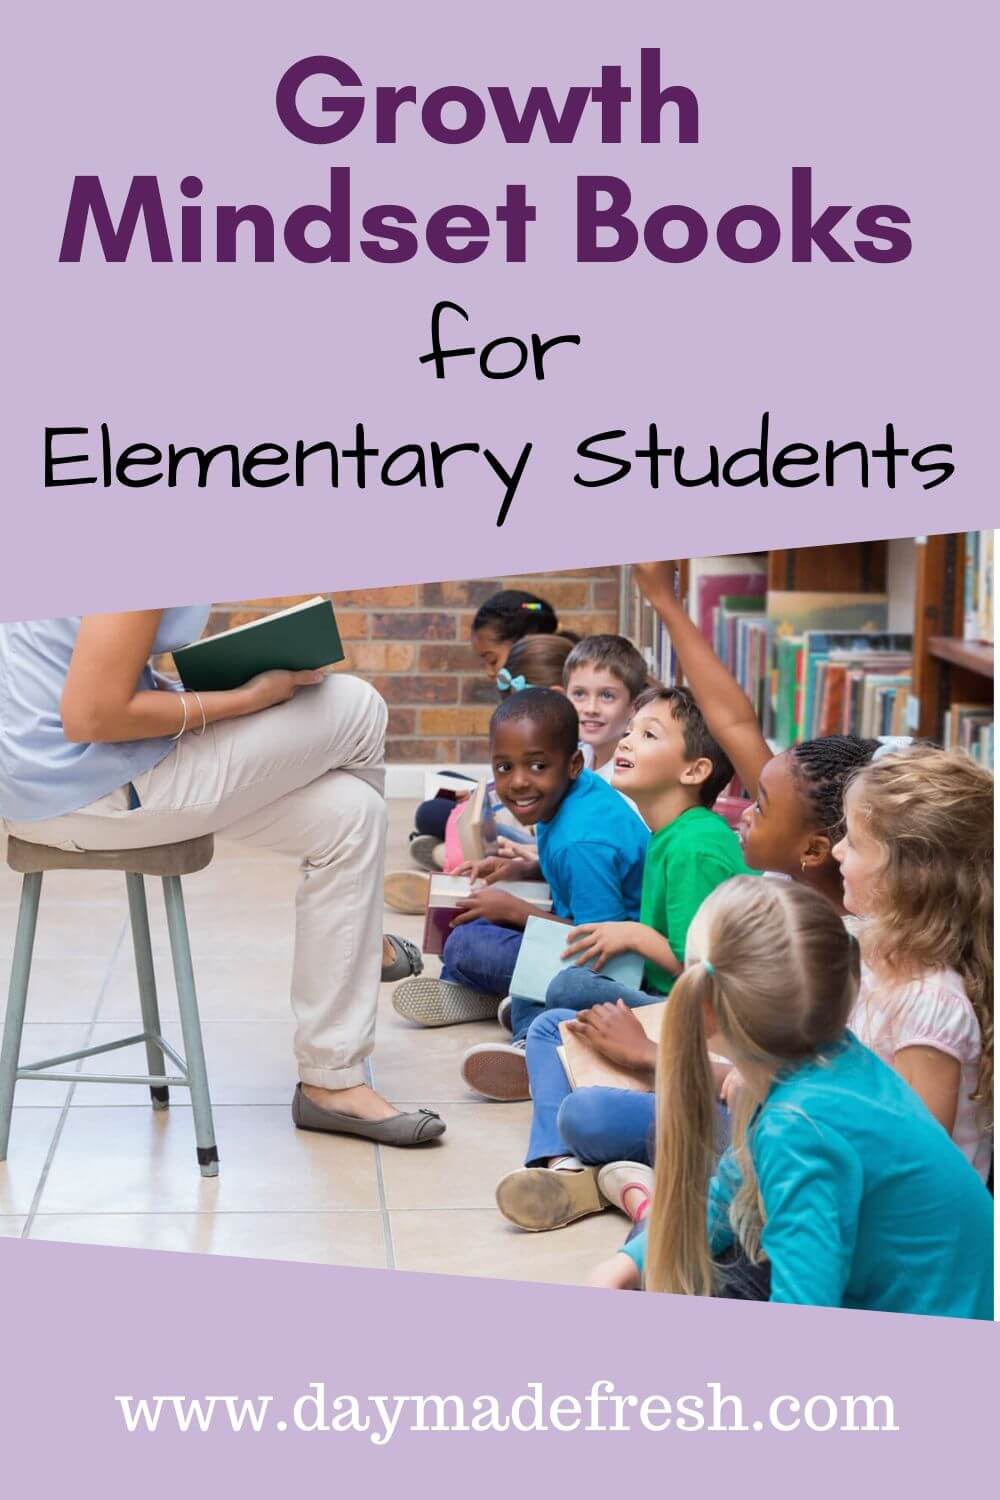 Growth Mindset Books for Elementary Students: Elementary Students